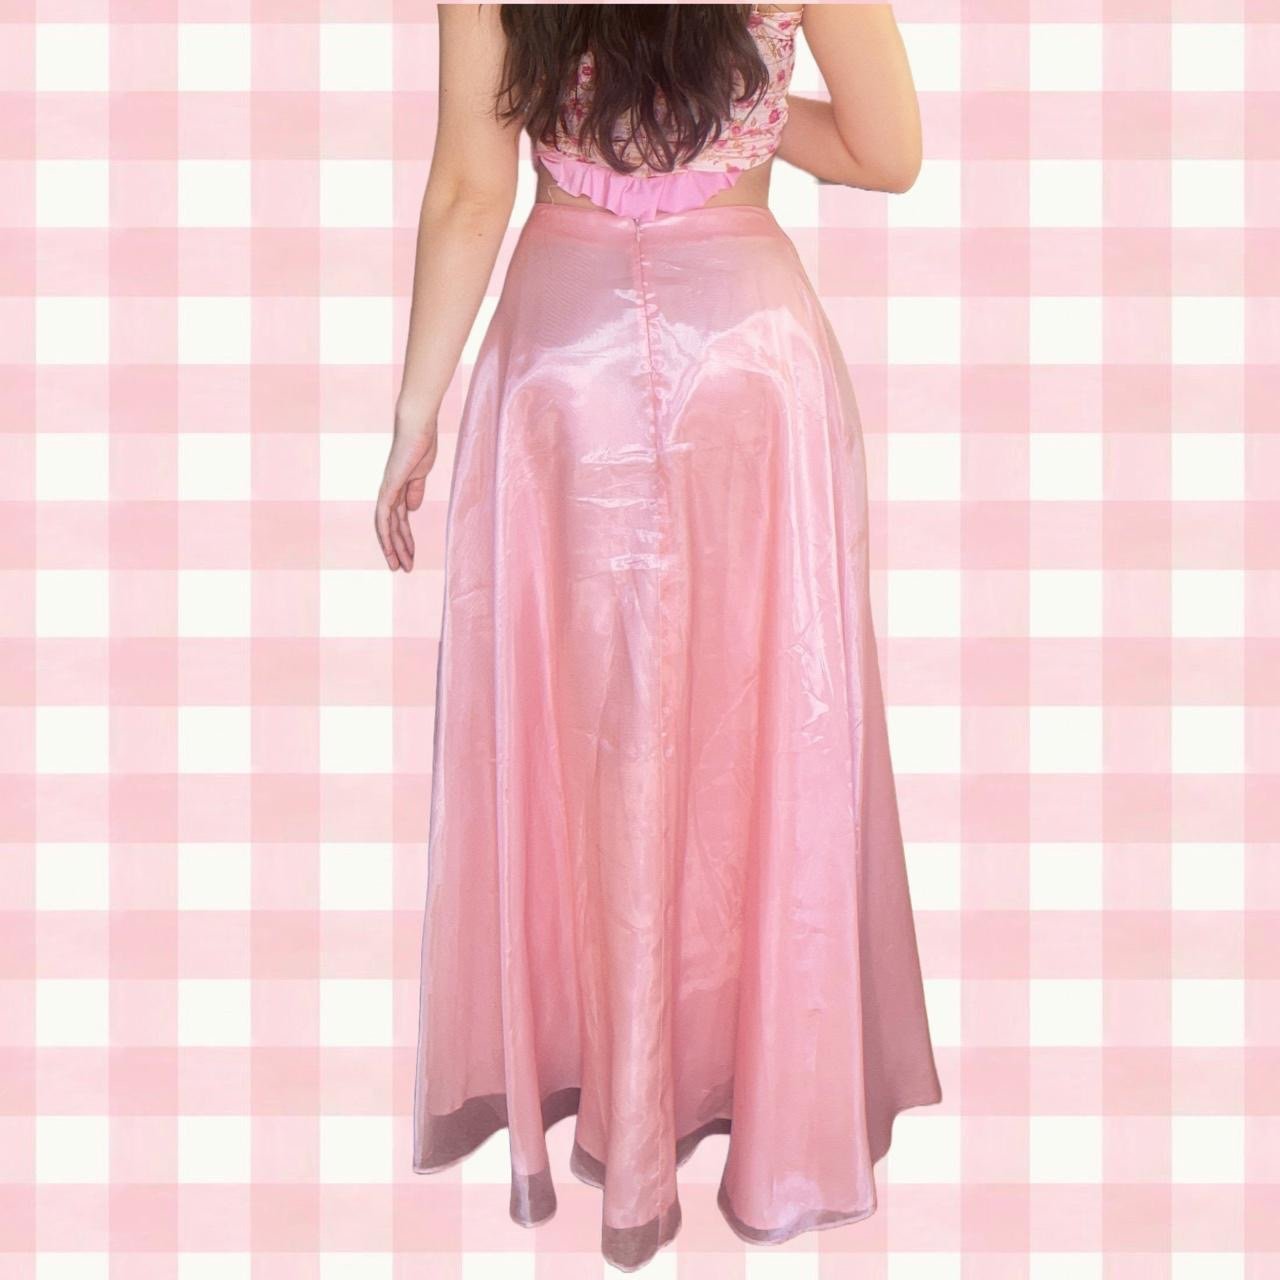 large selection True Vintage Pink Gown High Waisted Maxi Skirt IJLYIRclf Discount